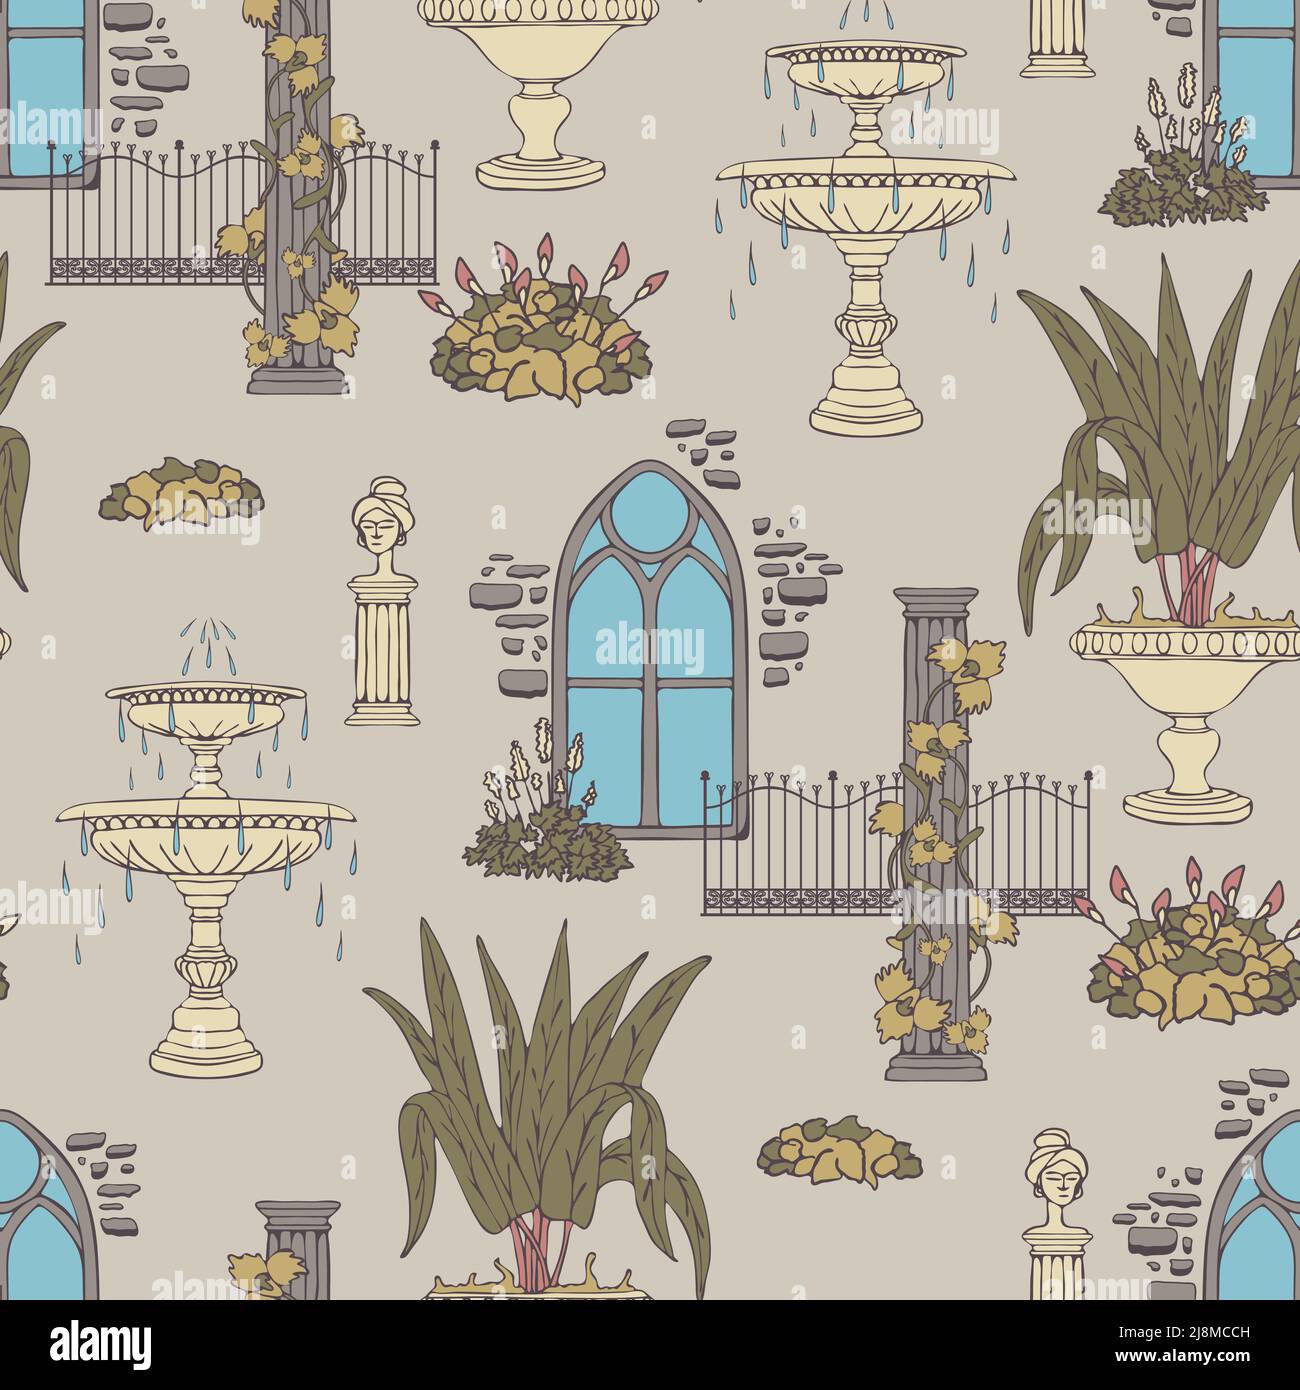 Seamless vector pattern with Victorian style garden on beige background. Vintage greenhouse wallpaper design. Decorative urban fashion textile. Stock Vector